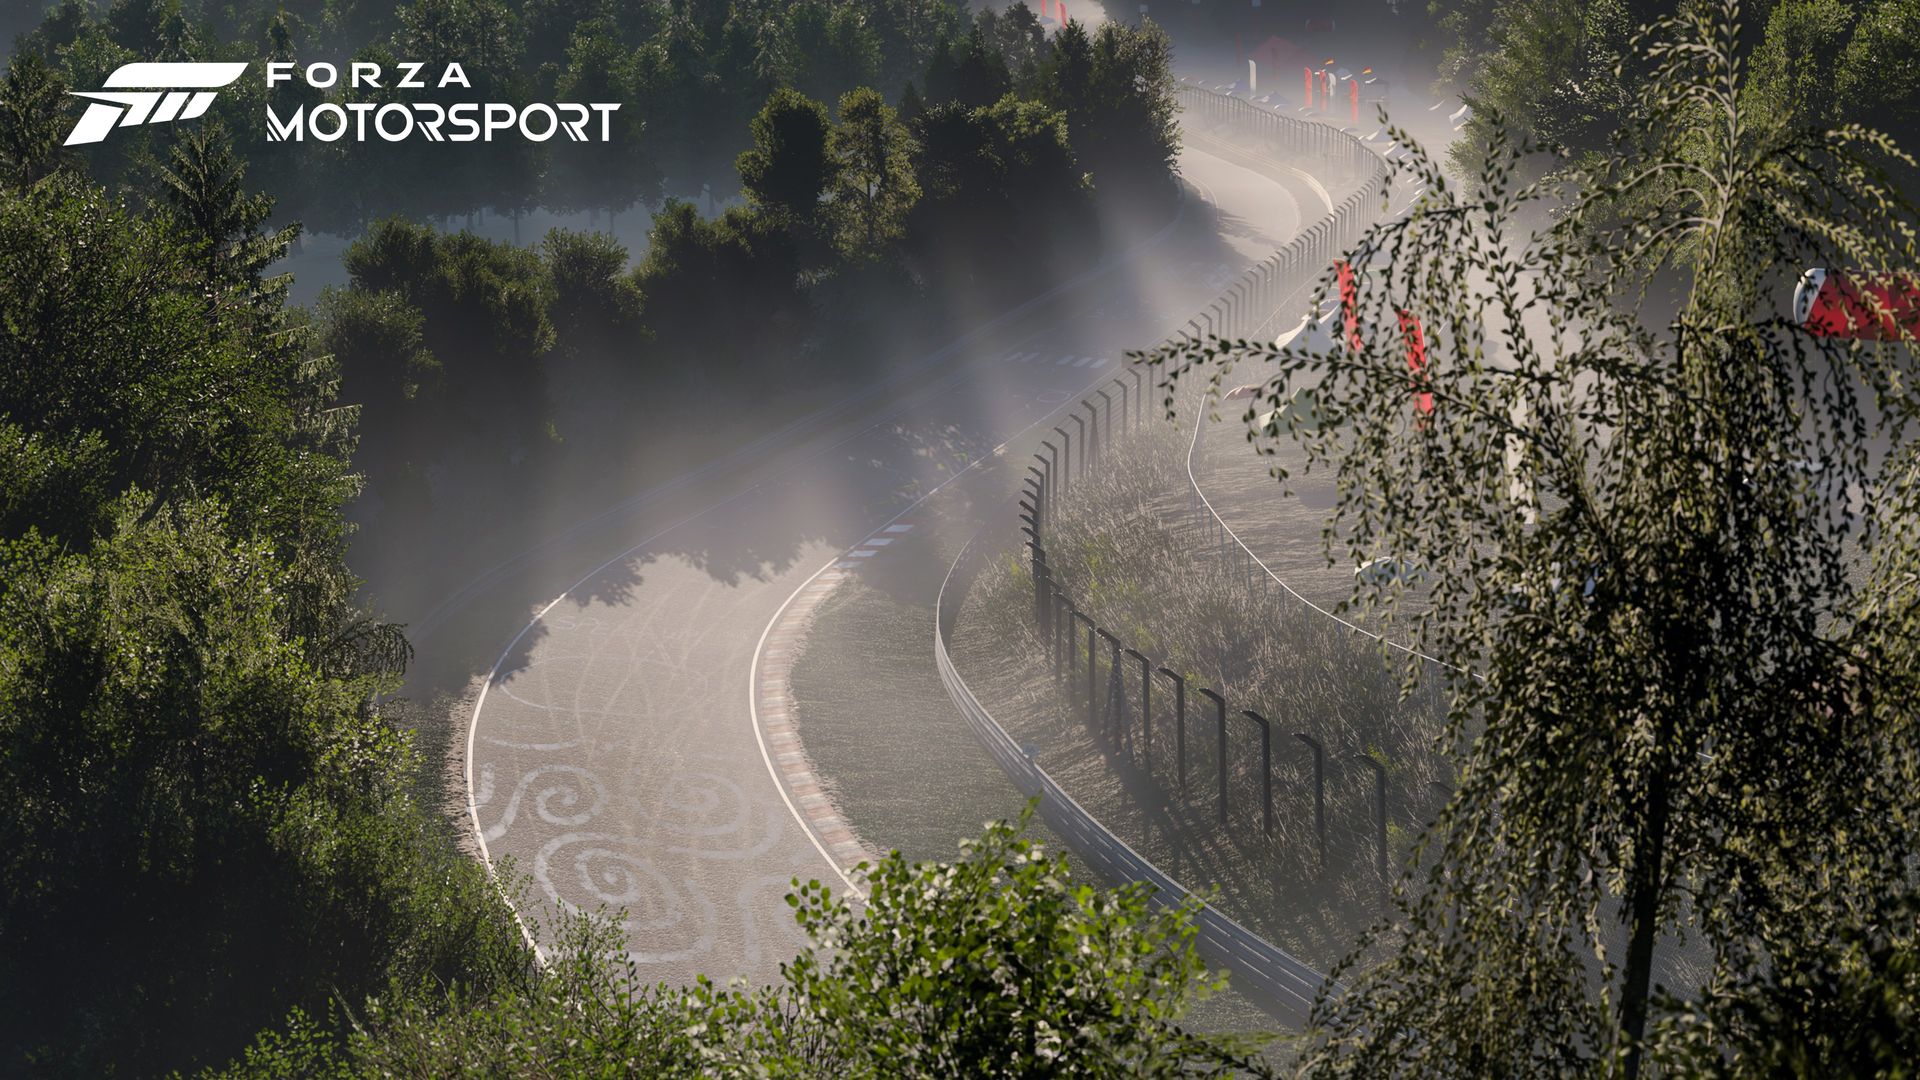 microsoft, the most challenging race circuit on the planet returns in forza motorsport's latest update